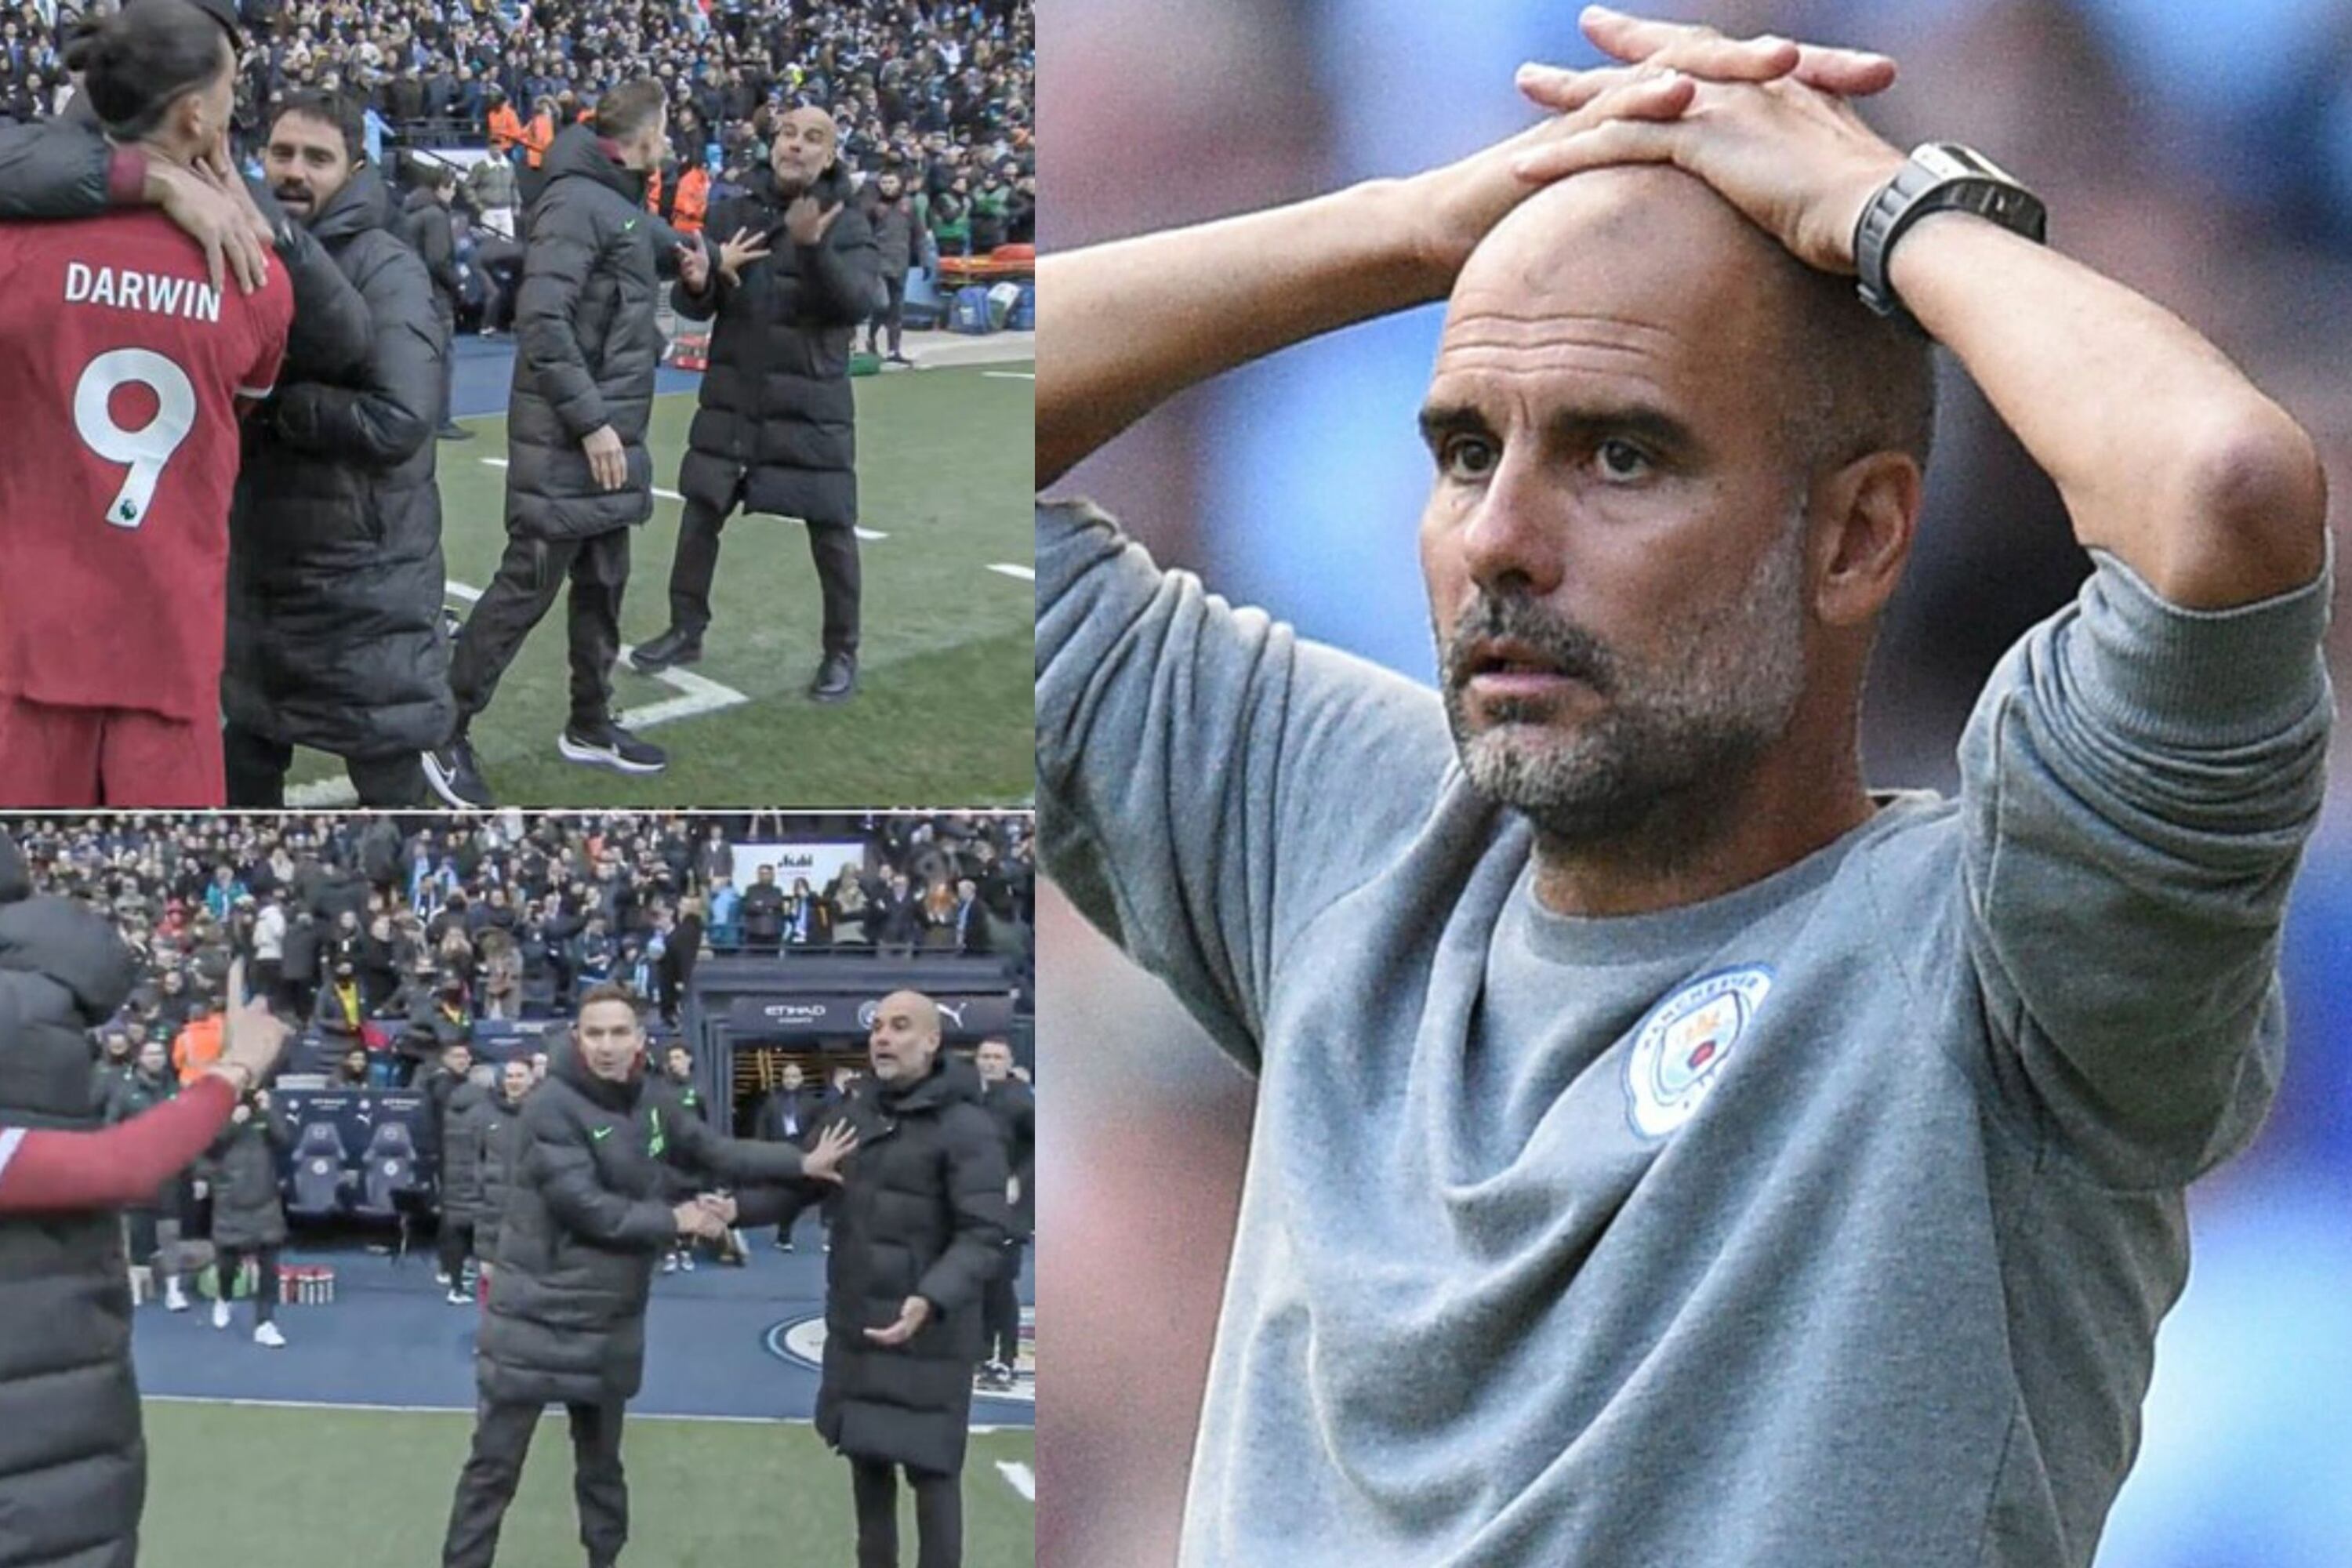 He quarreled with Darwin Nuñez, Pep Guardiola's words about the incident